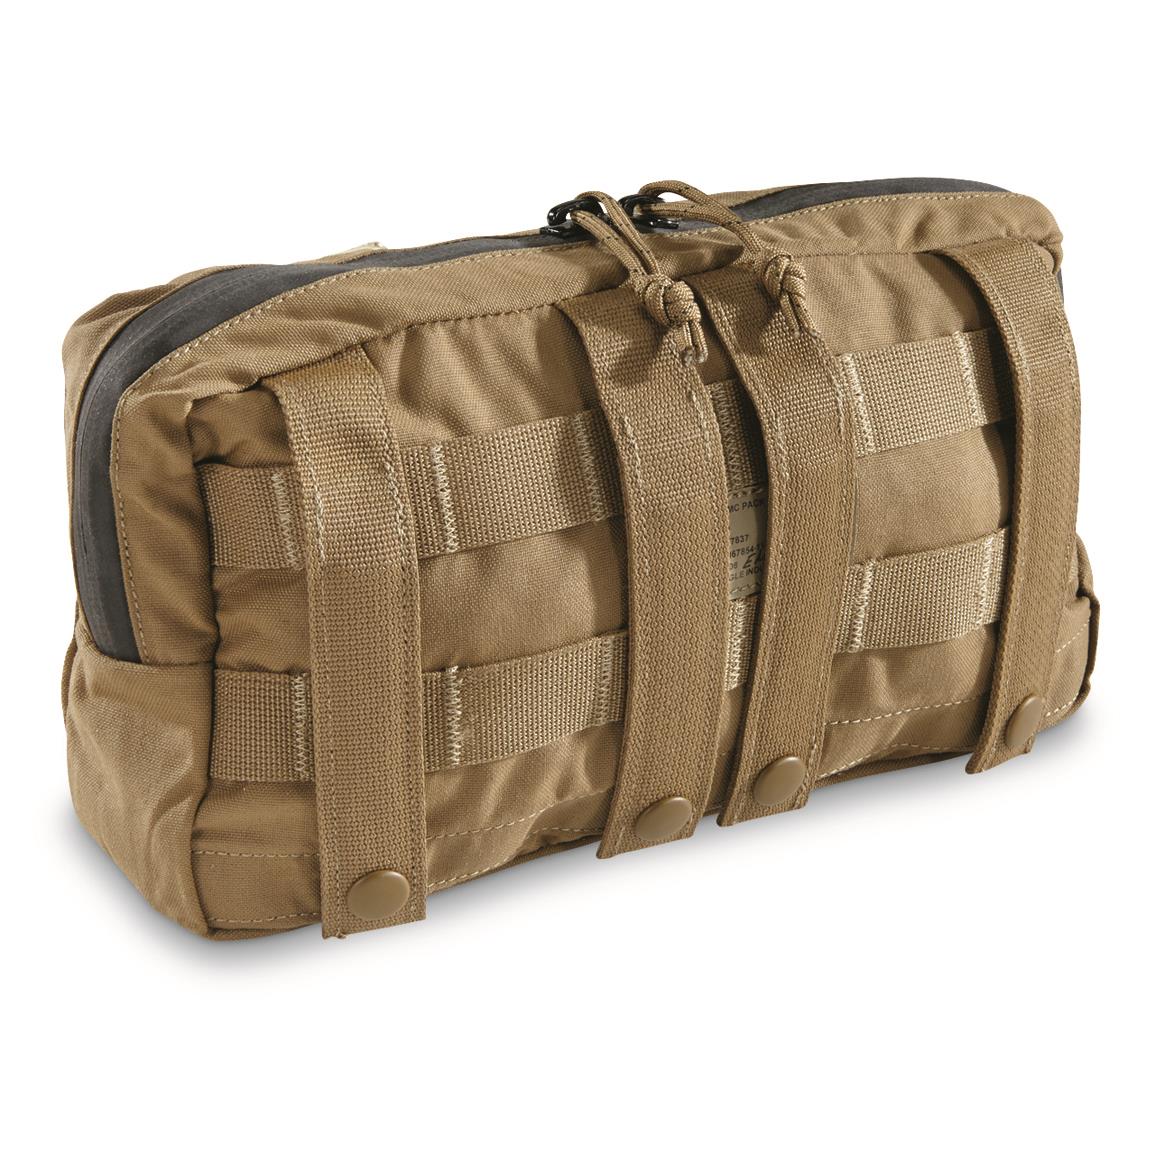 U.S. Military Surplus FILBE Assault Pouch, Used, Coyote